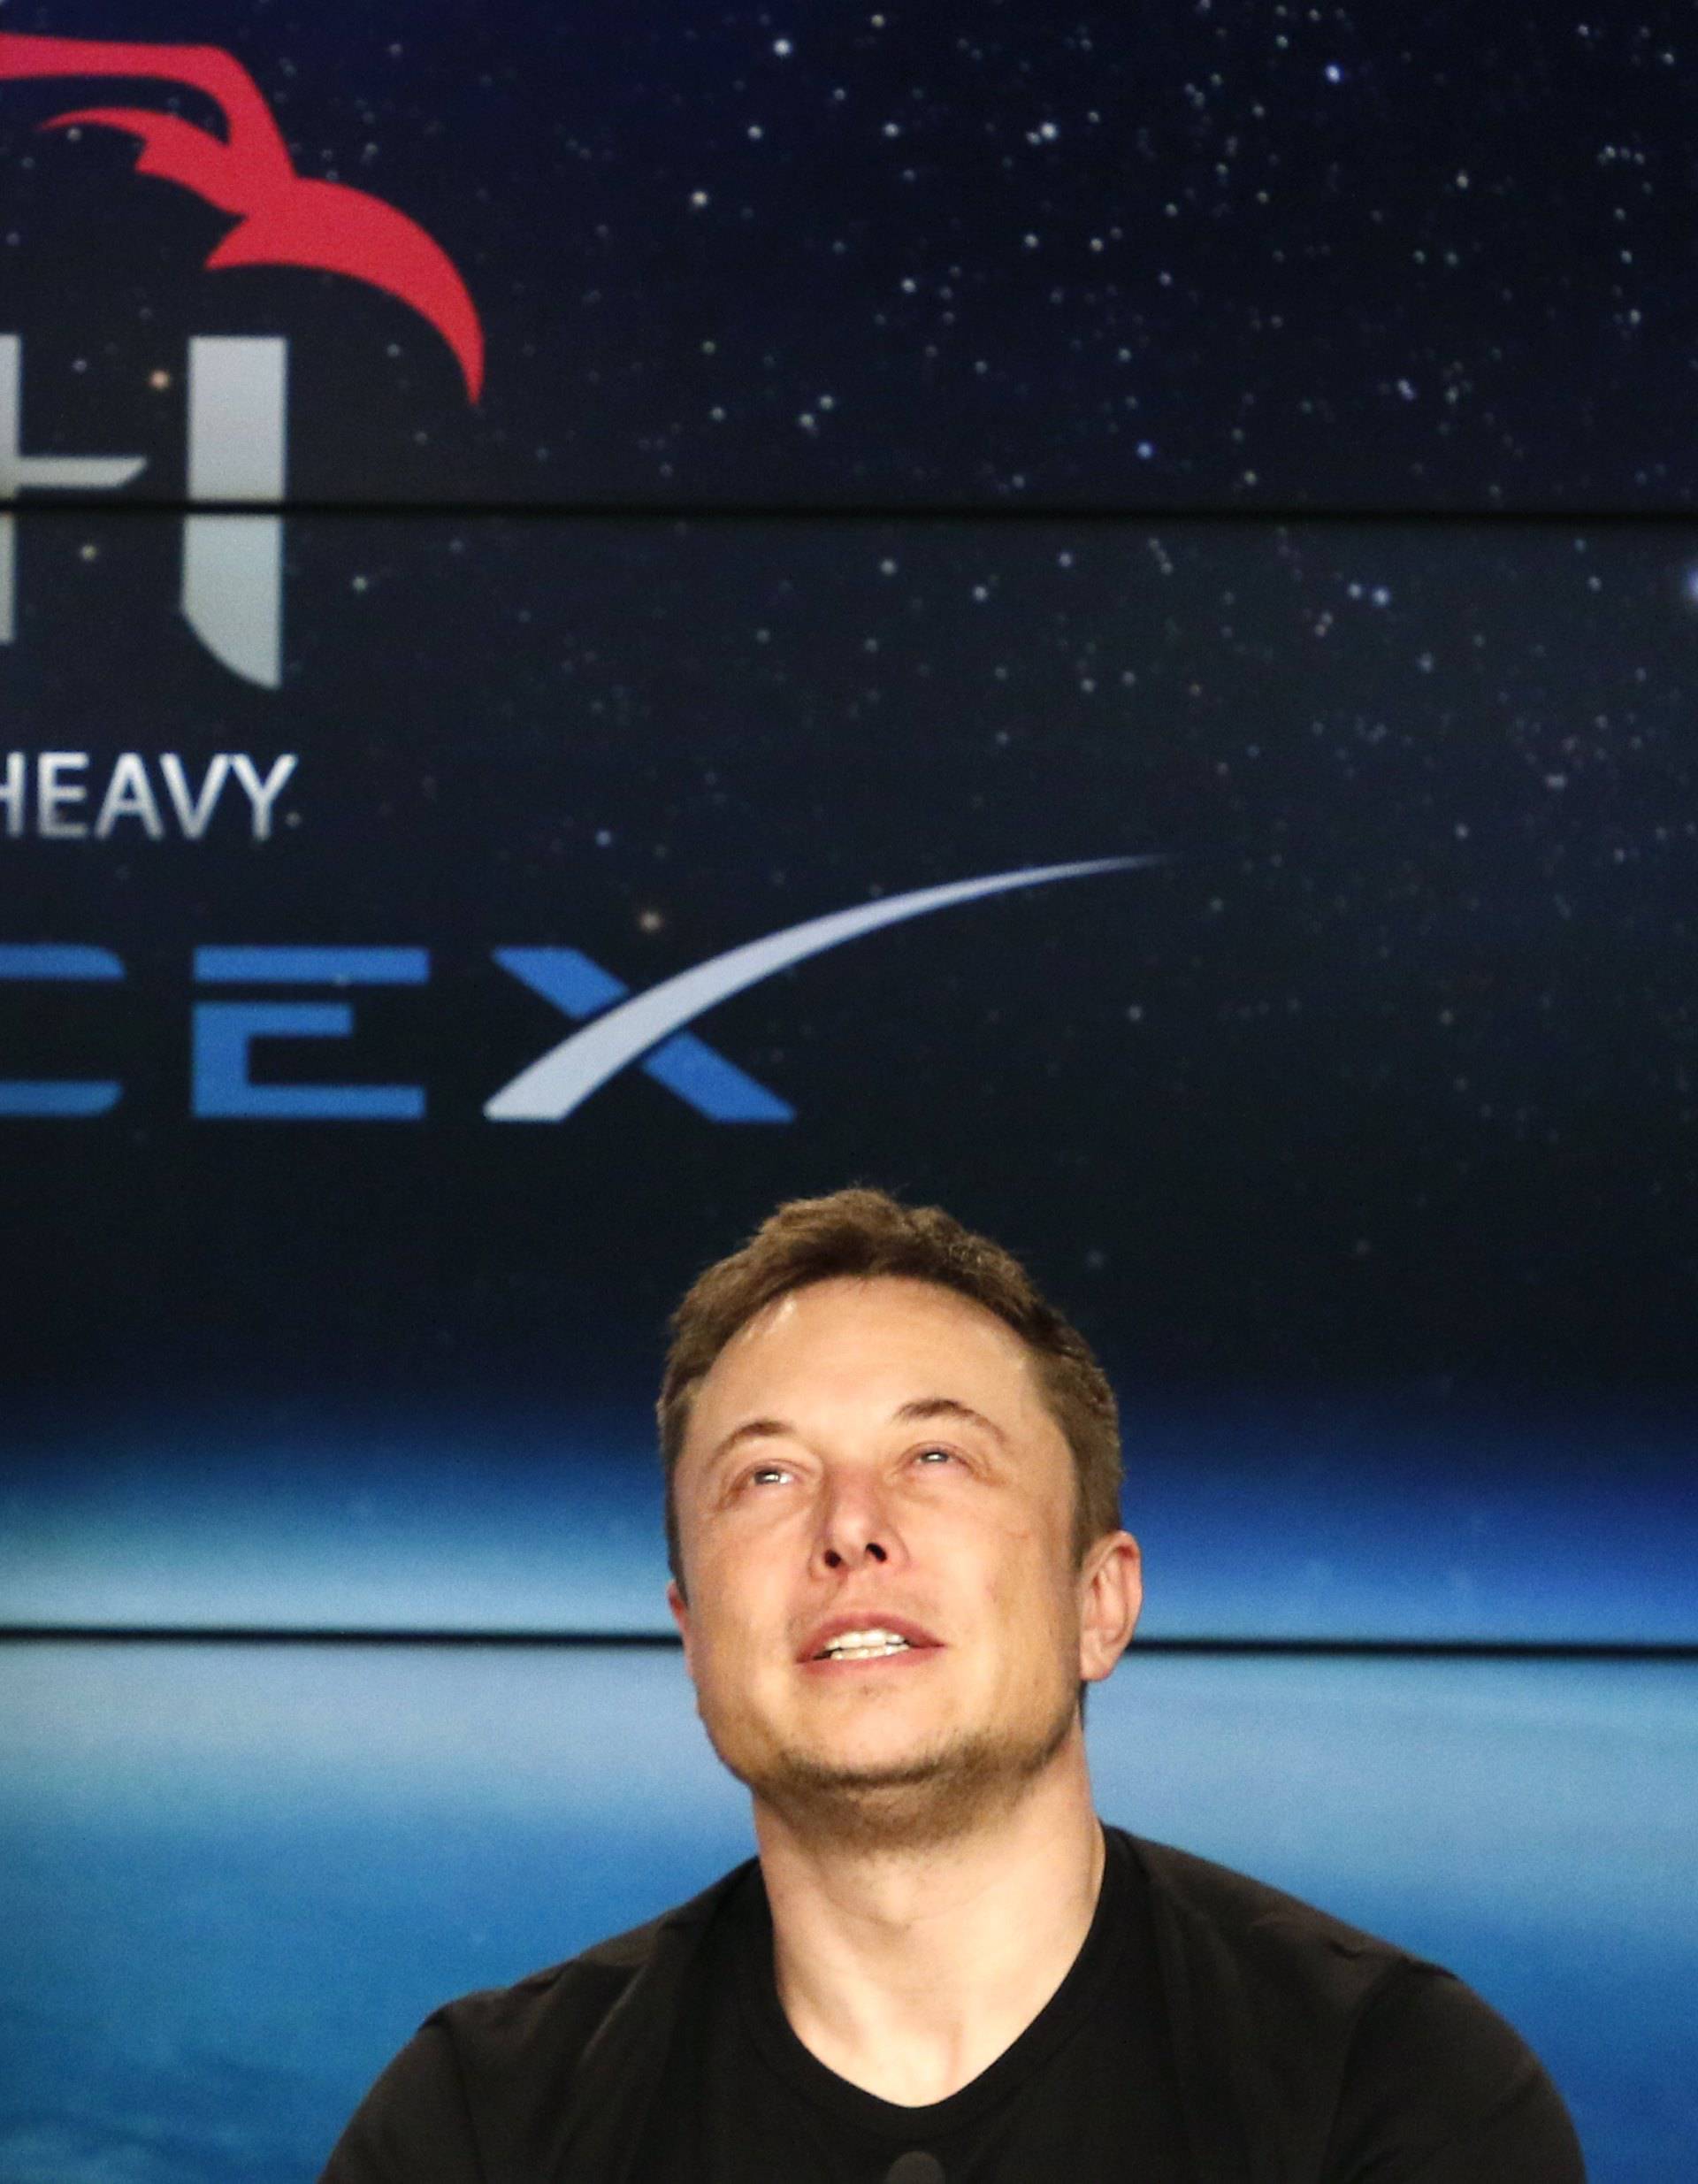 SpaceX founder Musk speaks at a press conference following the first launch of a SpaceX Falcon Heavy rocket in Cape Canaveral